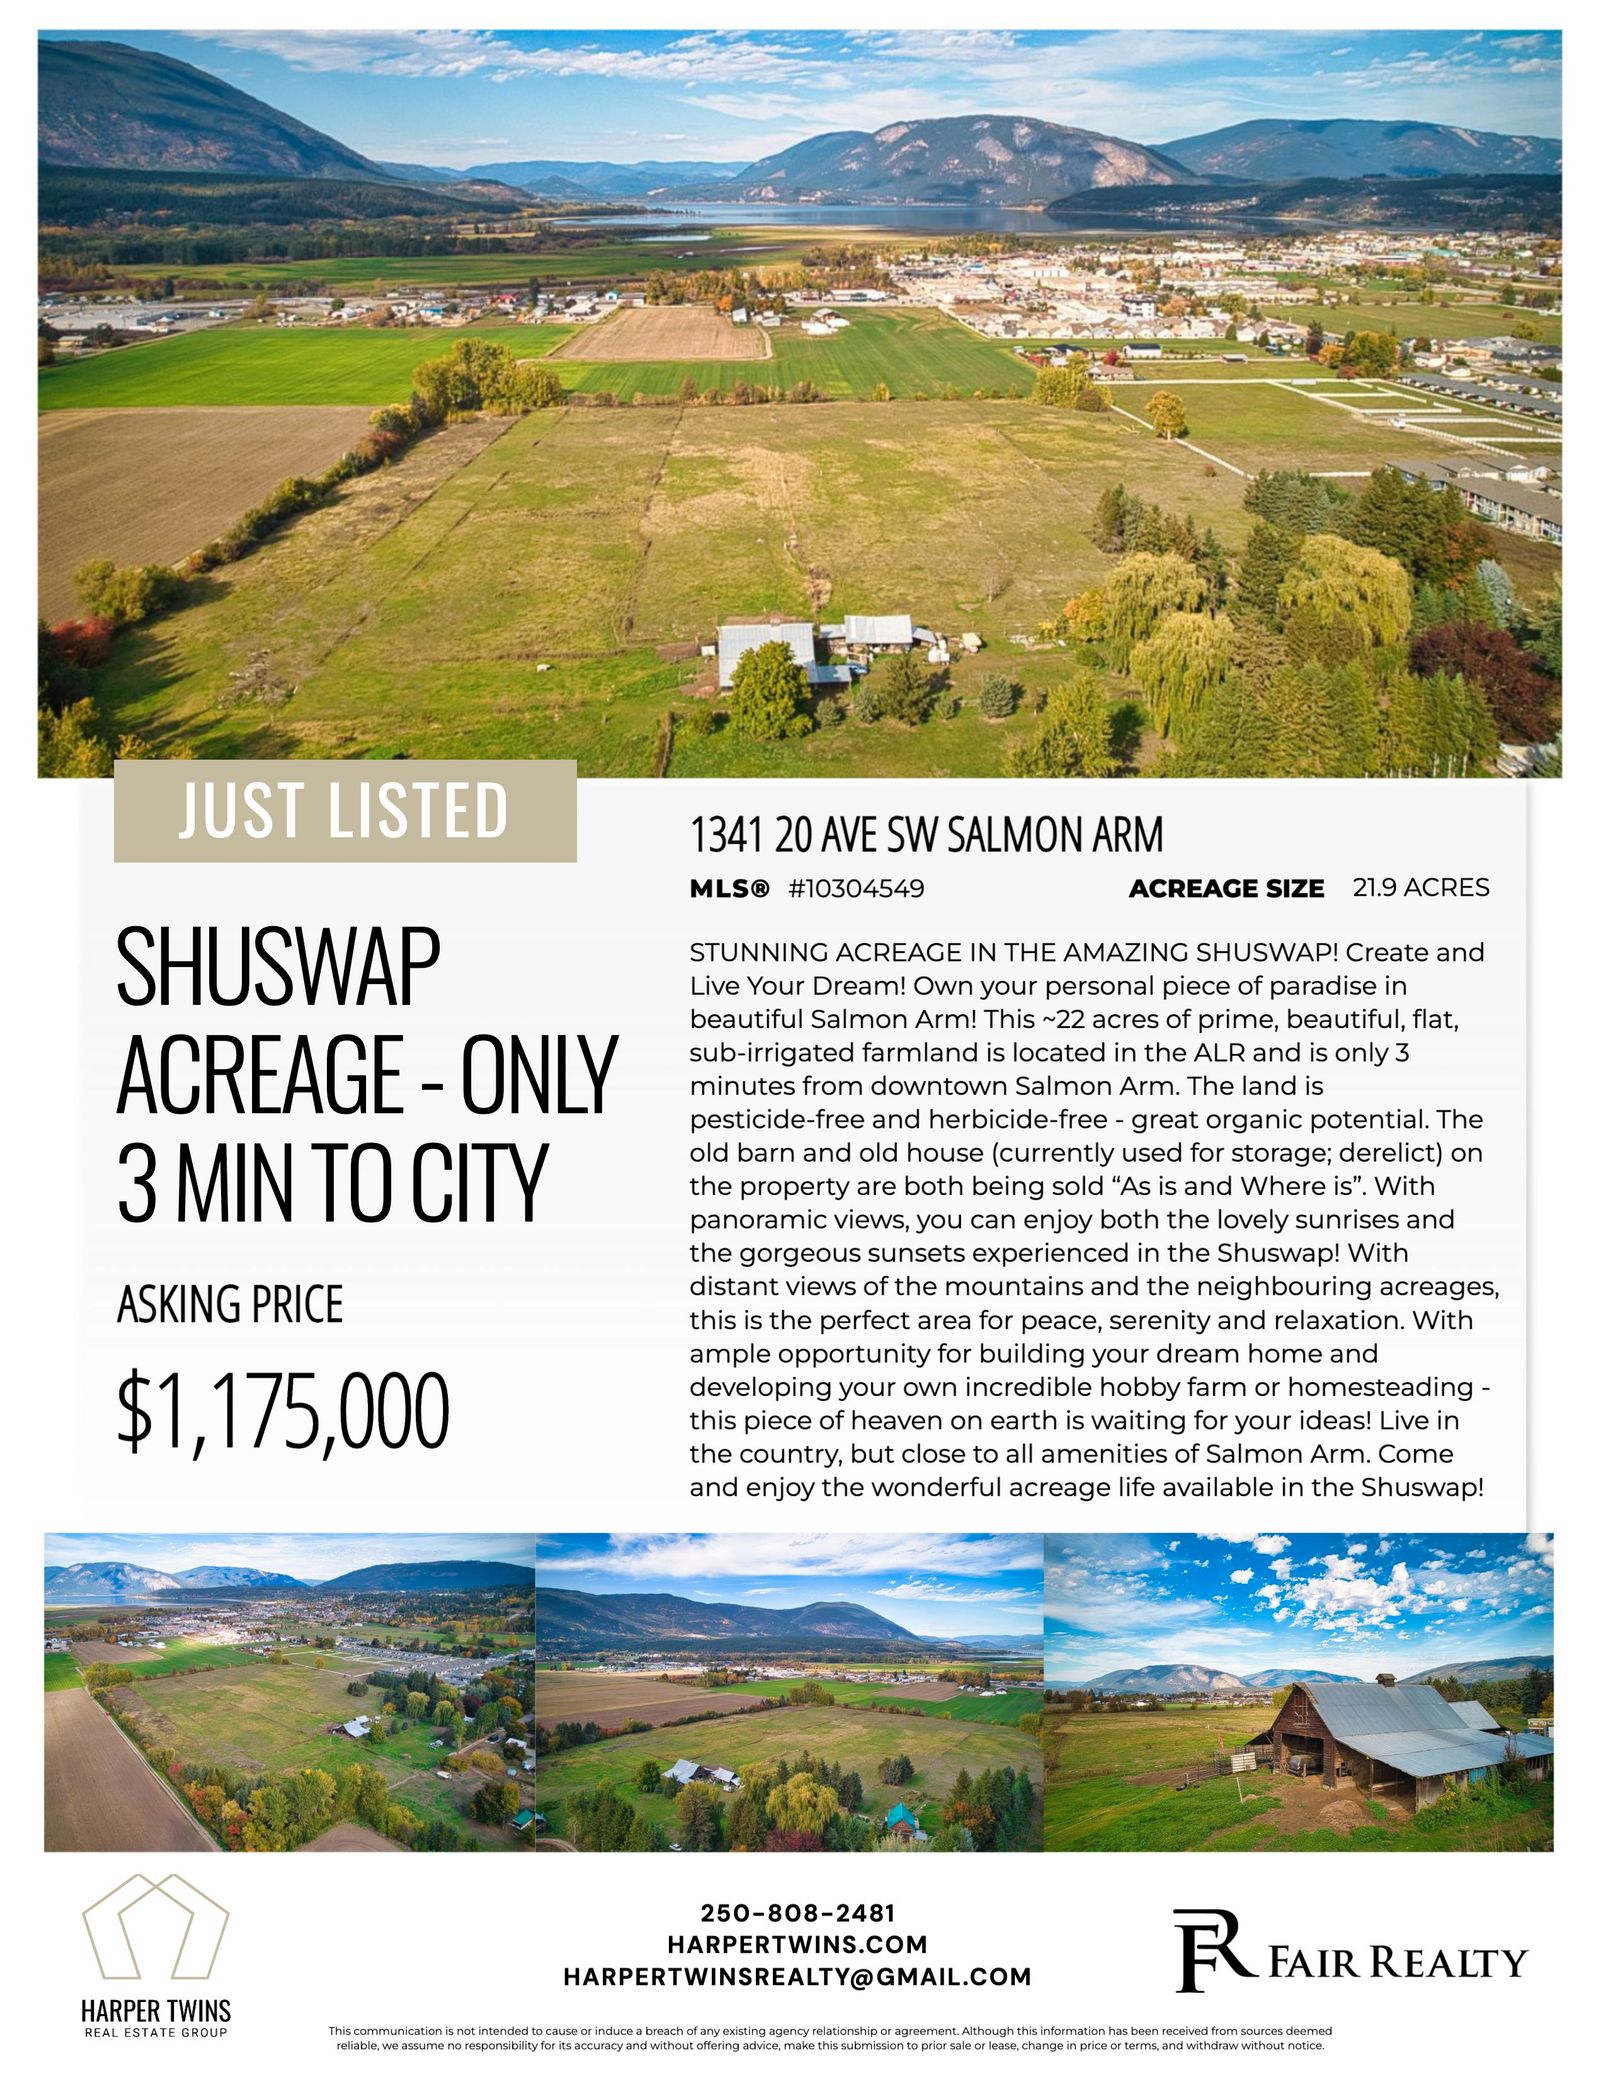 22 ACRES FOR SALE IN SALMON ARM